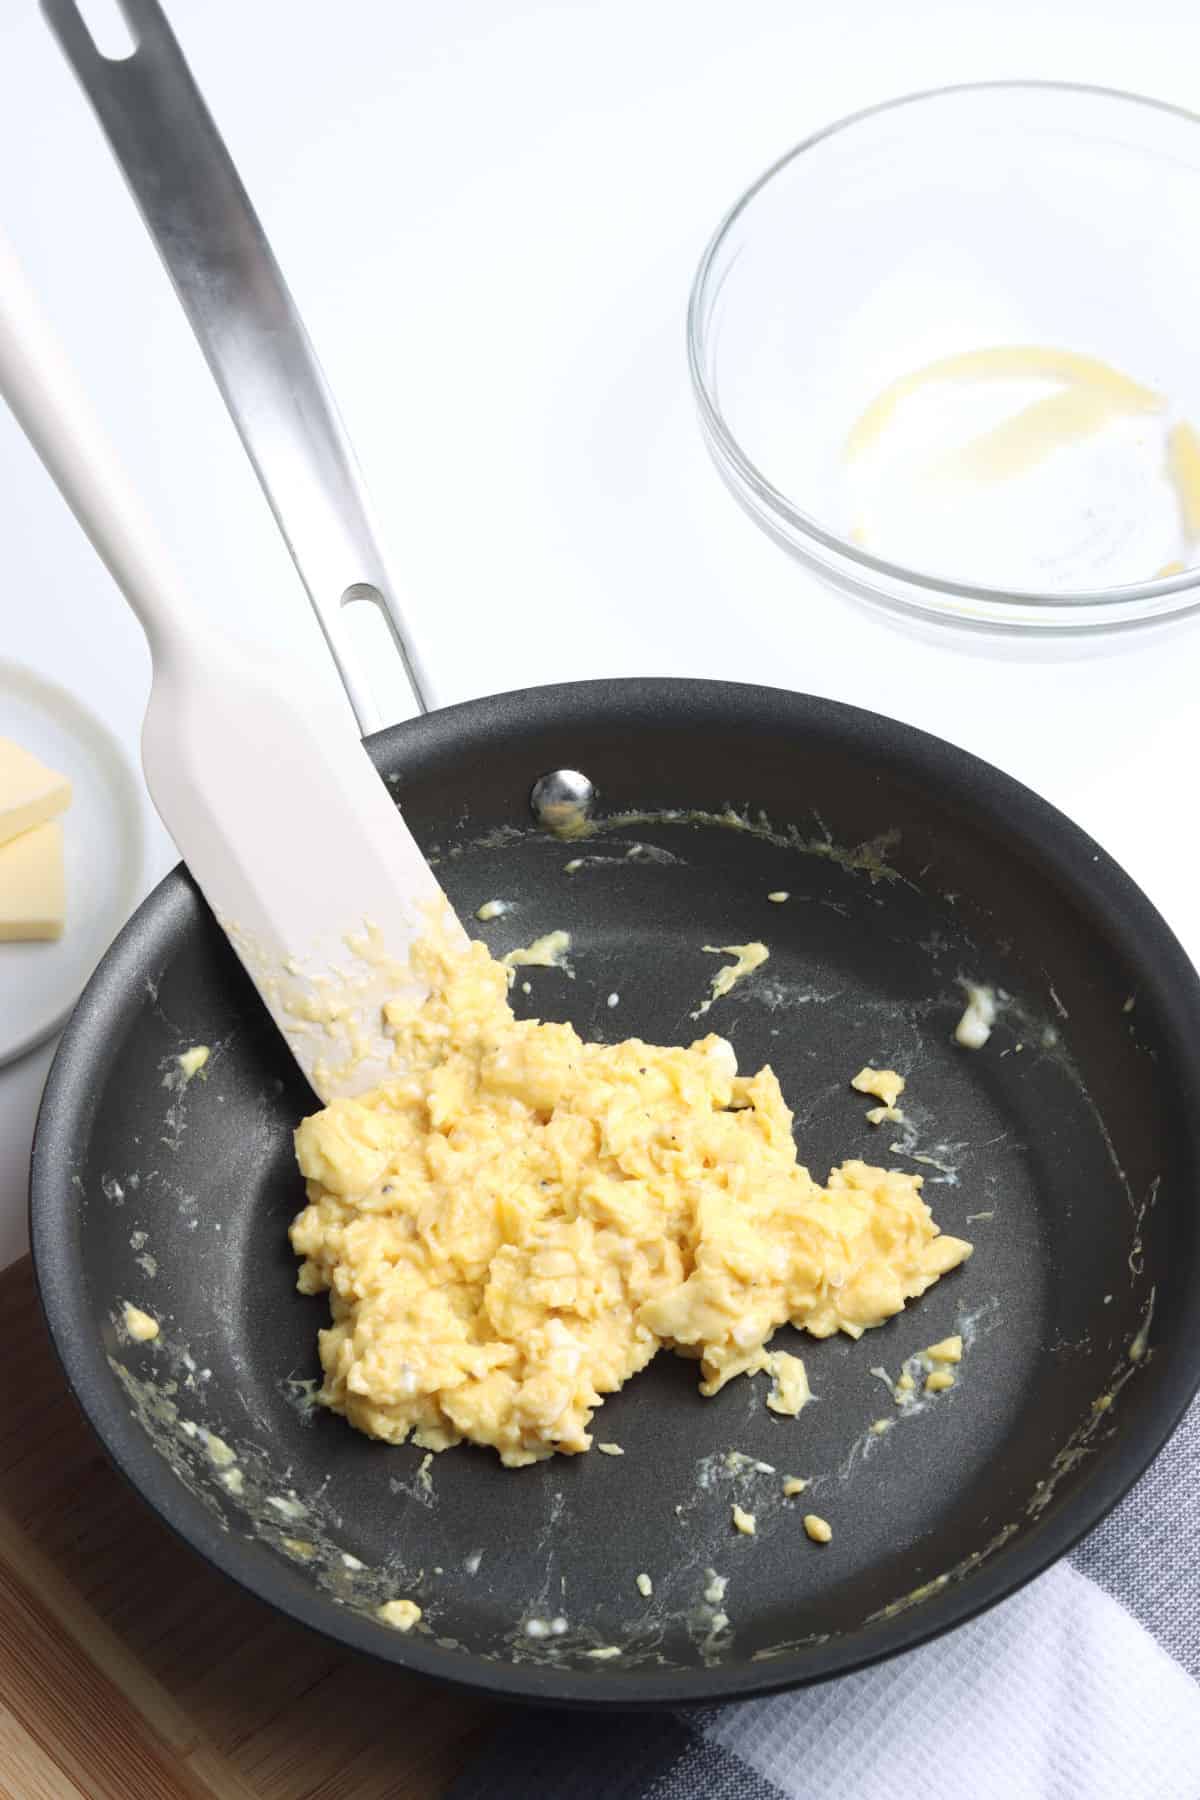 Cooked scrambled eggs in a pan.